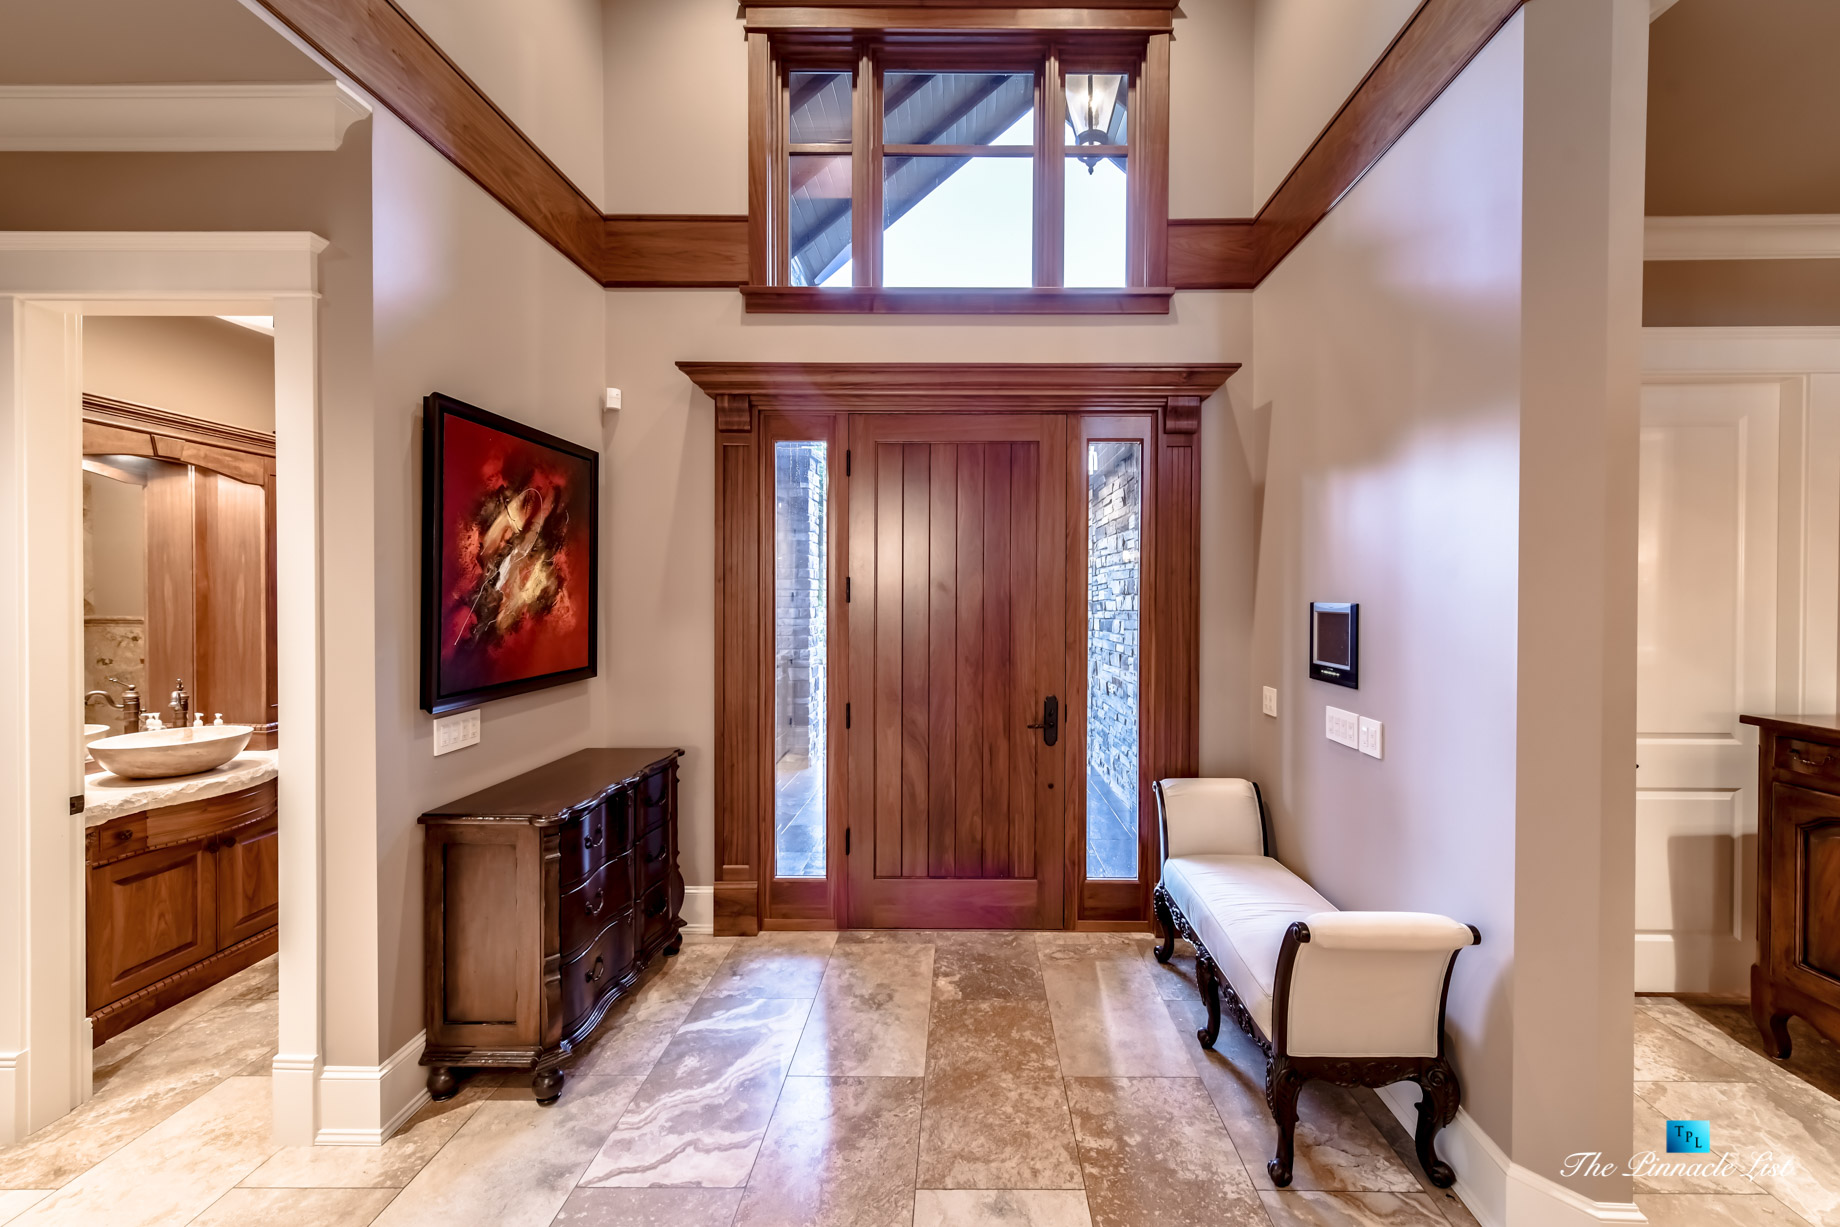 3053 Anmore Creek Way, Anmore, BC, Canada - Front Door Foyer - Luxury Real Estate - Greater Vancouver Home